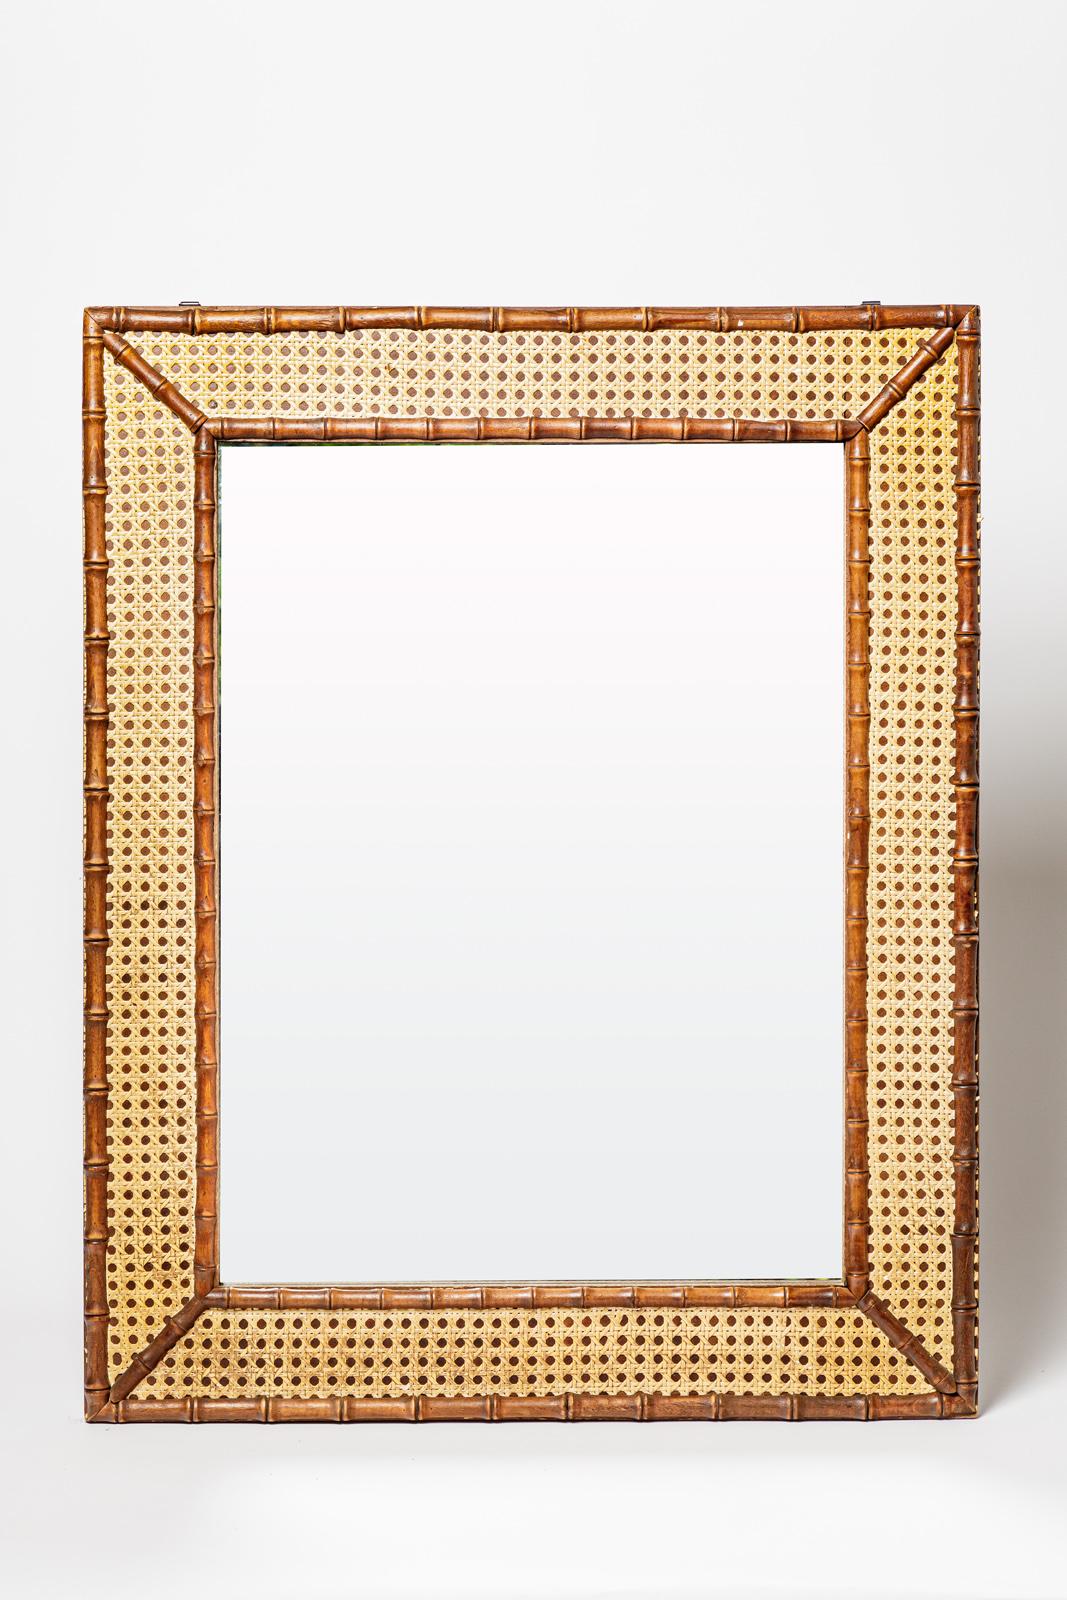 MIrror - 20th century design

Large wood and bamboo wall mirror

Original good condition

Height 74 cm
Large 60 cm